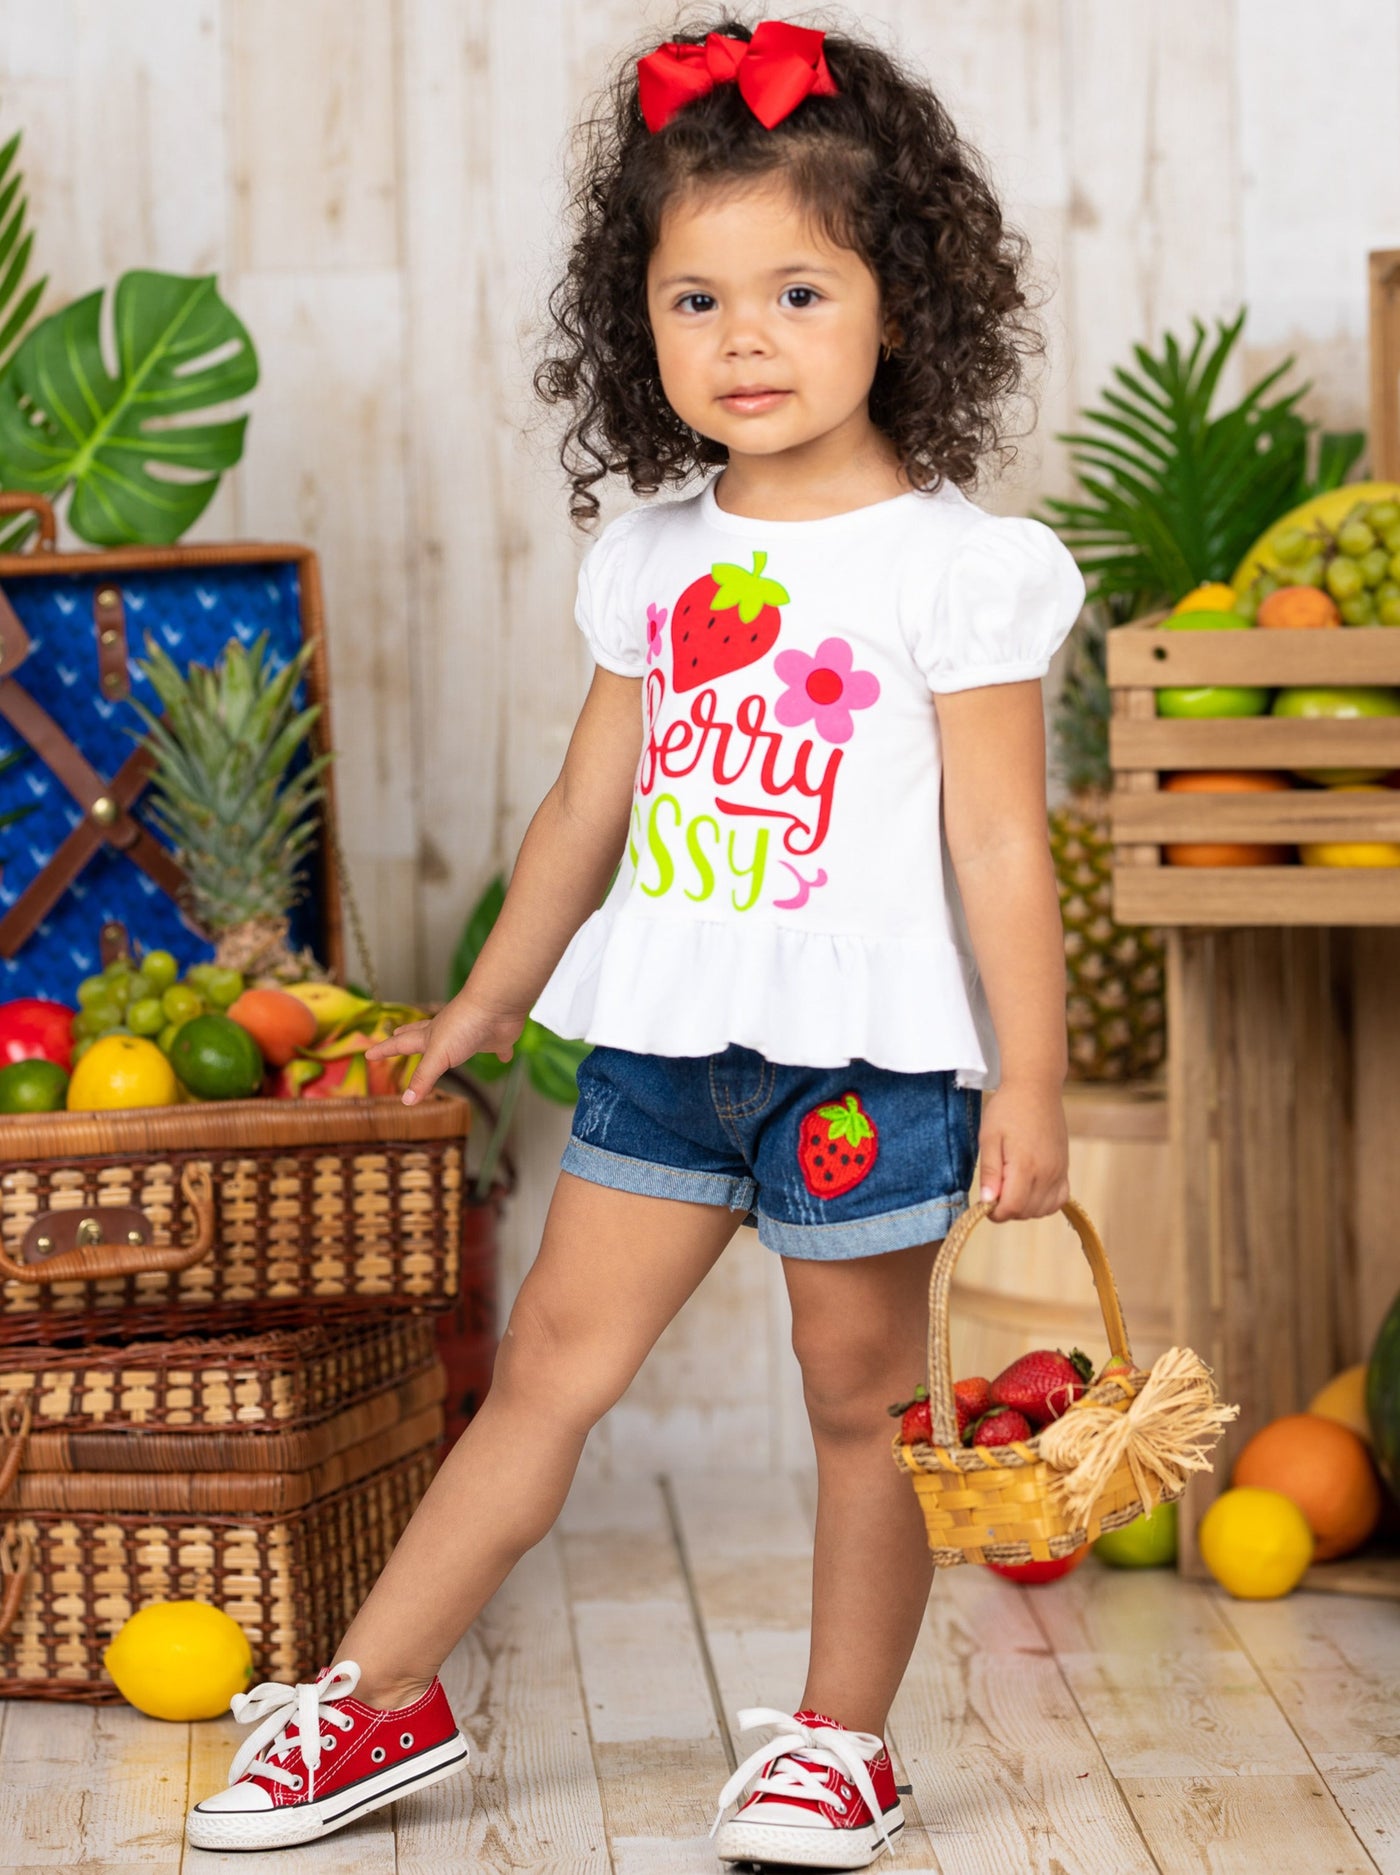 Girls Spring Outfits | Berry Sassy Graphic Tee & Denim Shorts Set